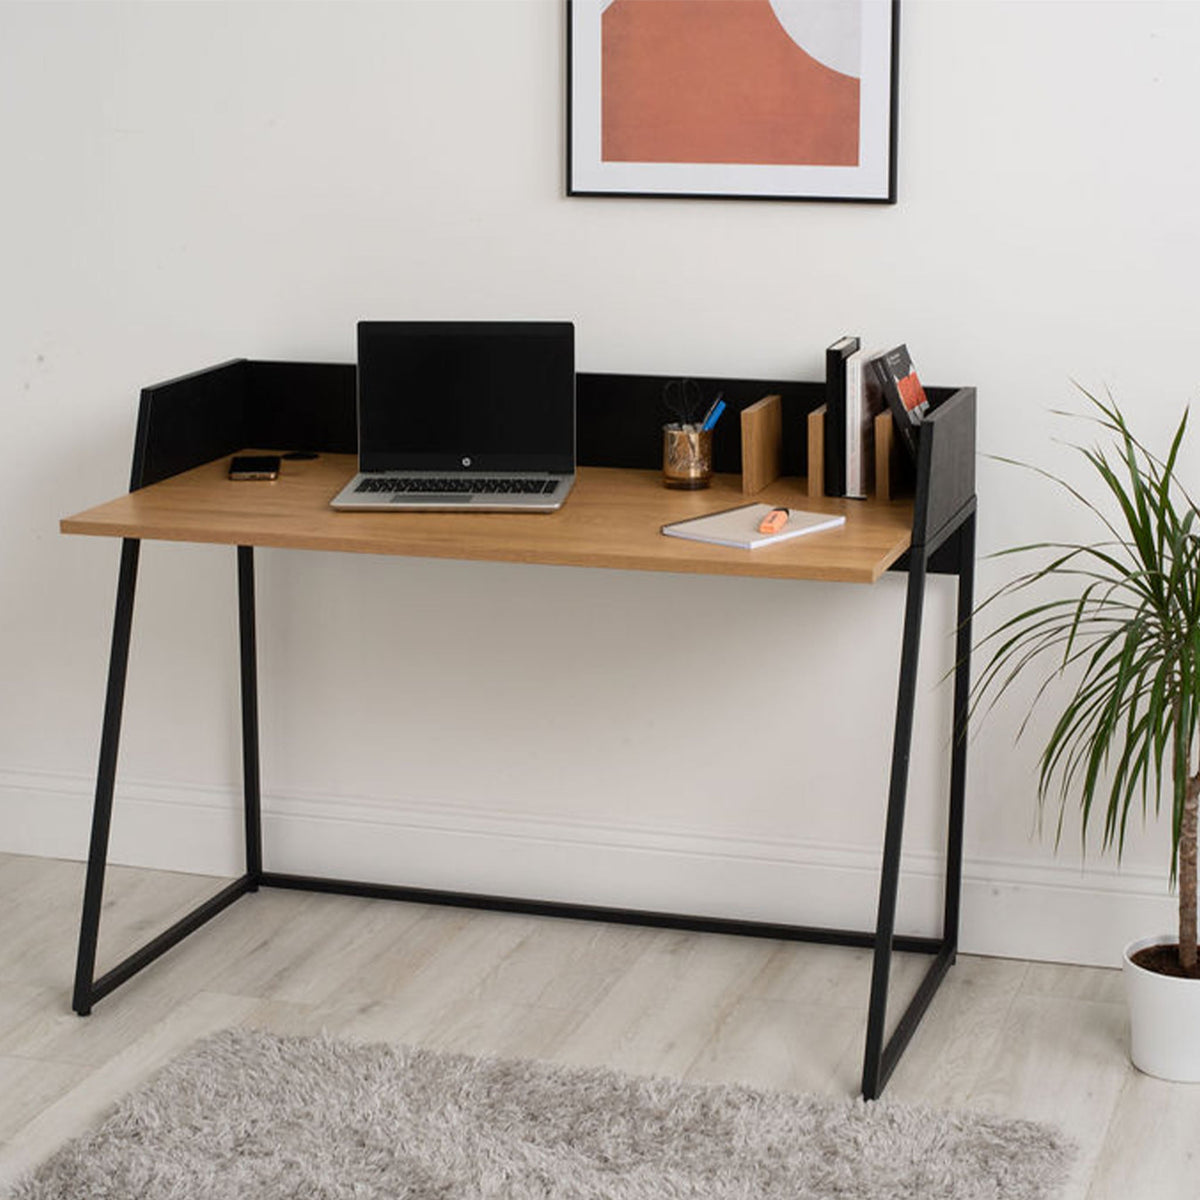 Kennett Wireless Smart Office Desk for Working From Home Lifestyle Setting